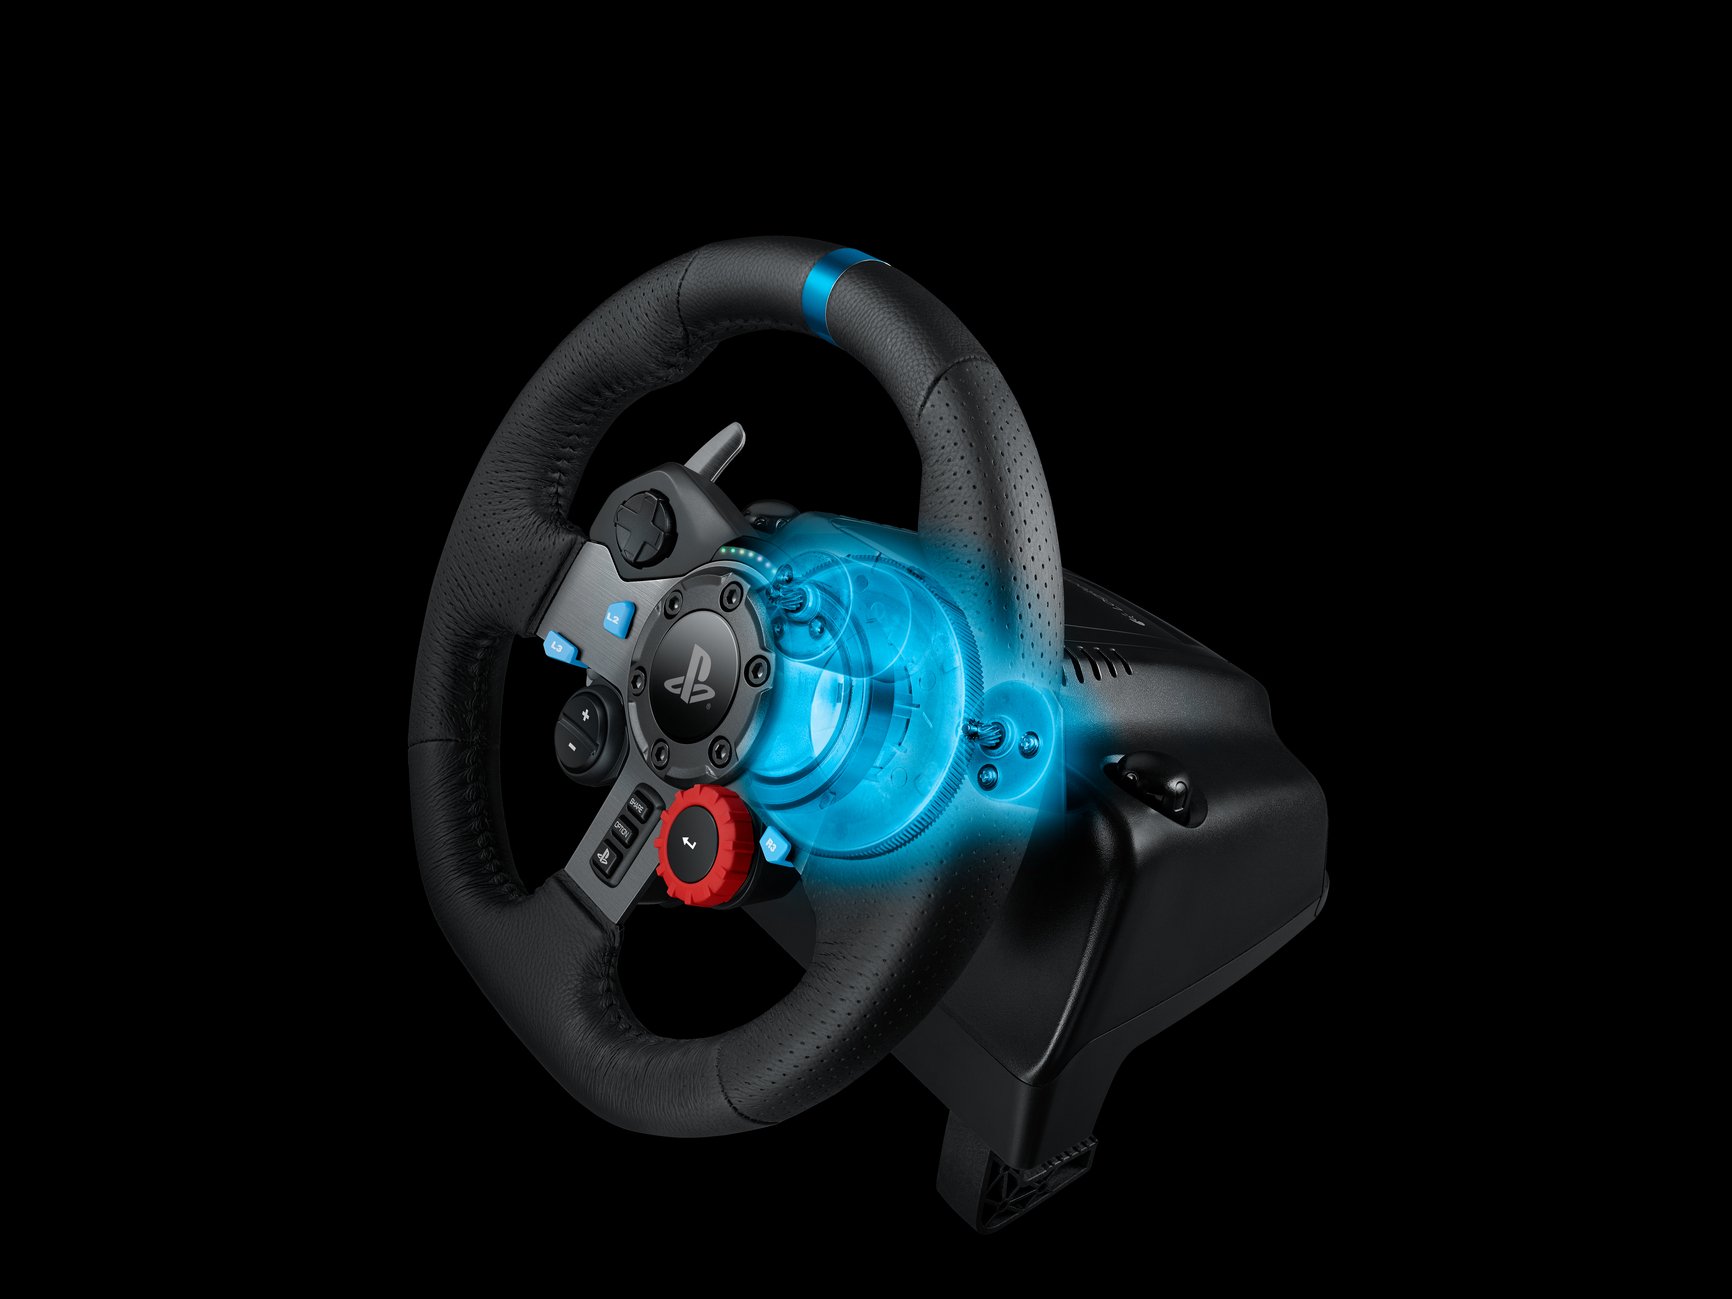 Logitech G29 Driving Force Racing Wheel and Floor Pedals, Real Force Feedback, Stainless Steel Paddle Shifters, Leather Steering Wheel Cover, Adjustable Floor Pedals, EU-Plug, PS4/PS3/PC/Mac, Black